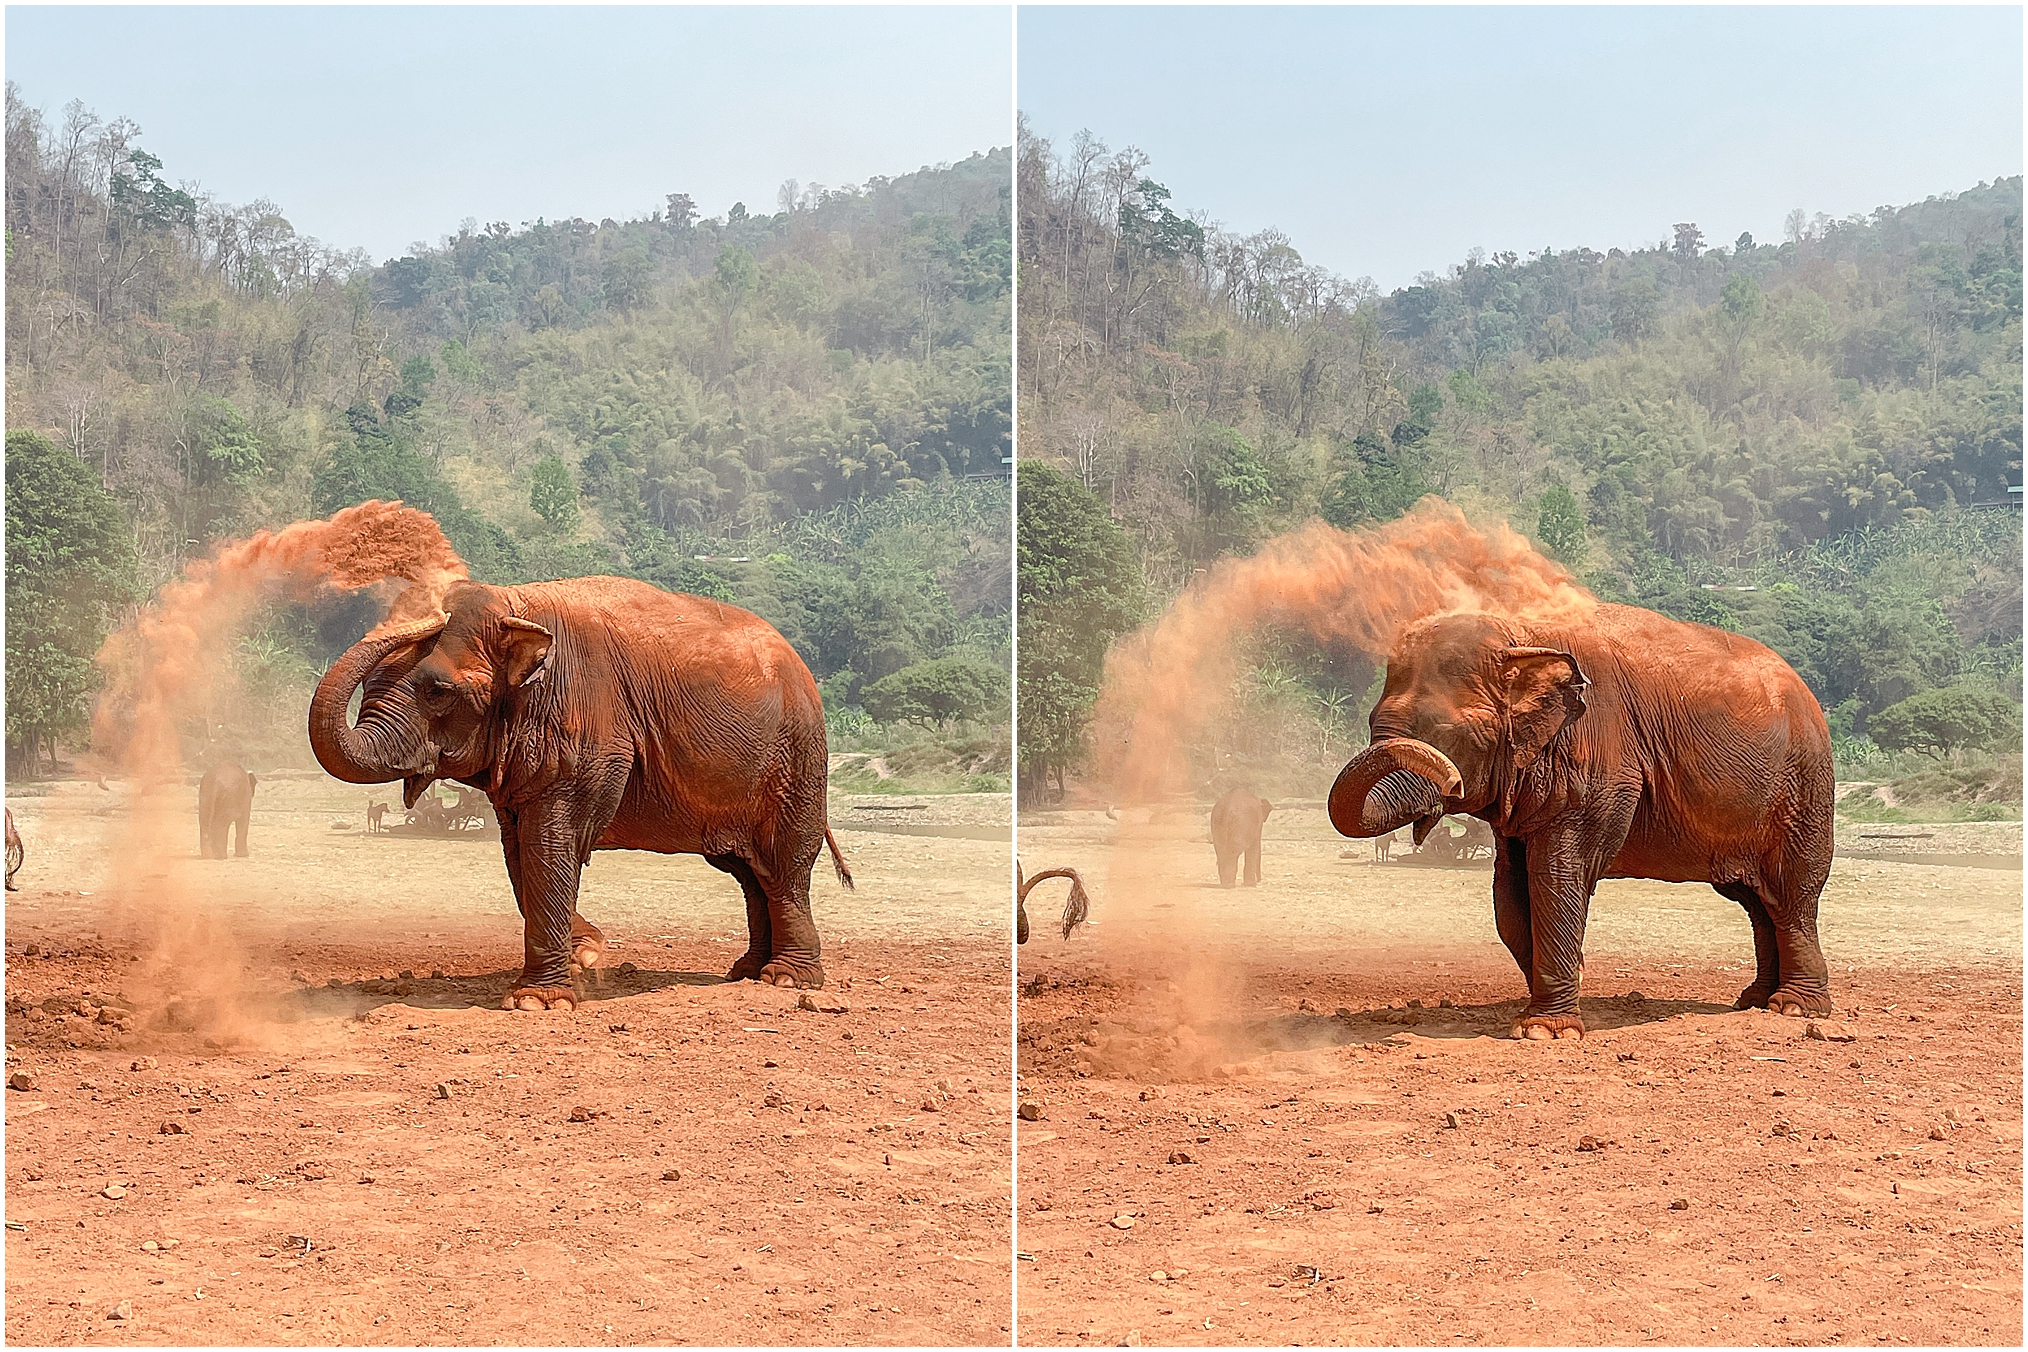 Elephant Nature Park: Ethical Vs Non-Ethical Animal Sanctuaries in Chiang Mai, Thailand